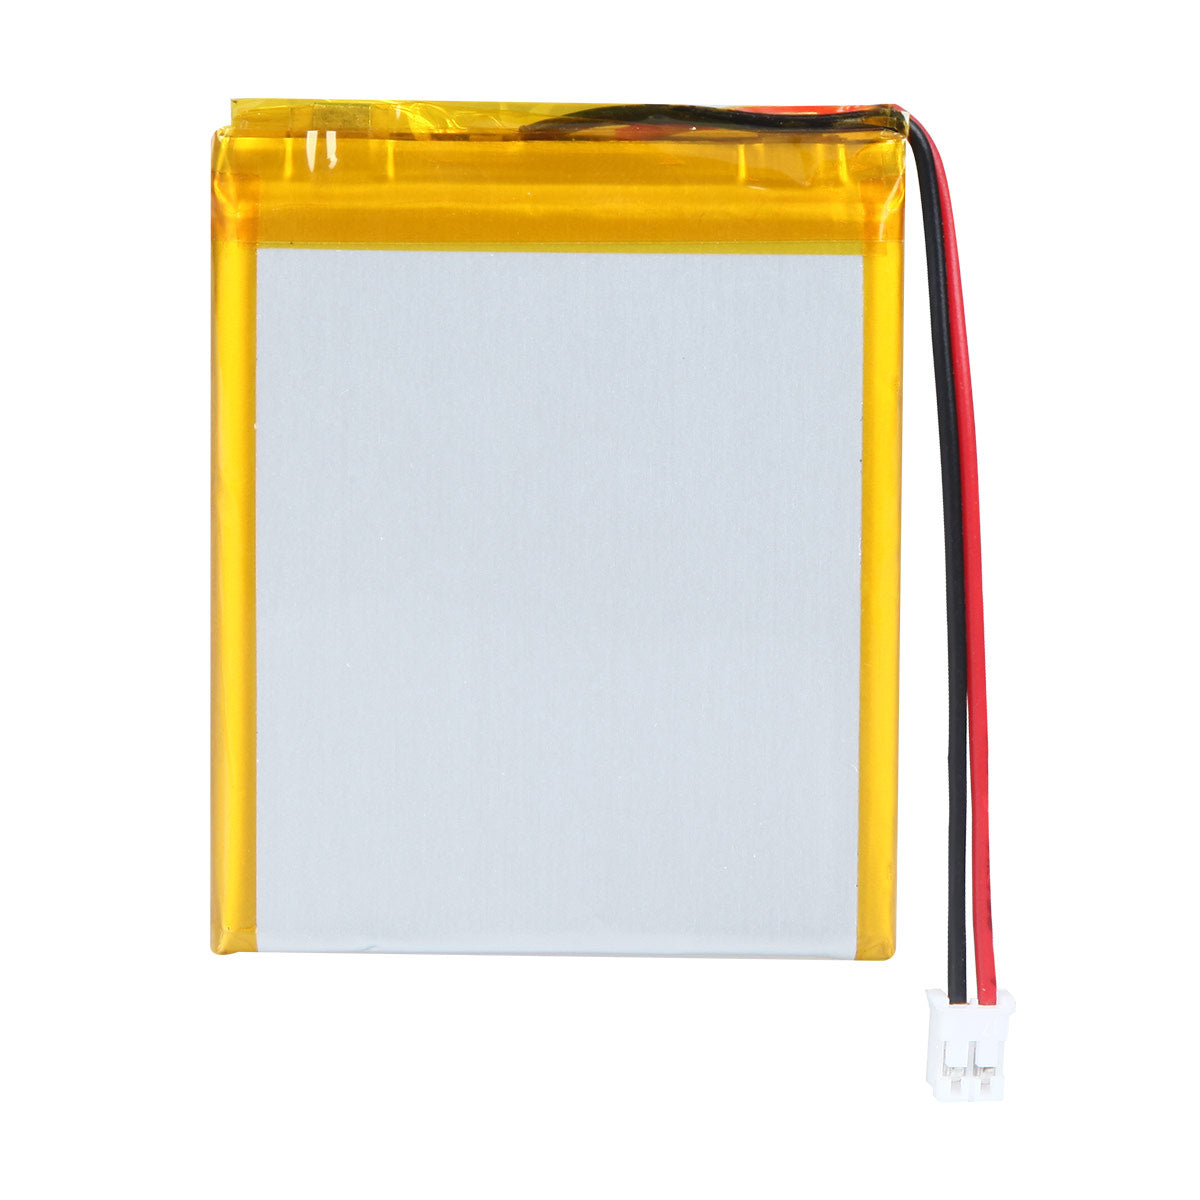 YDL 3.7V 1300mAh 425060 Rechargeable Lithium Polymer Battery Length 62mm